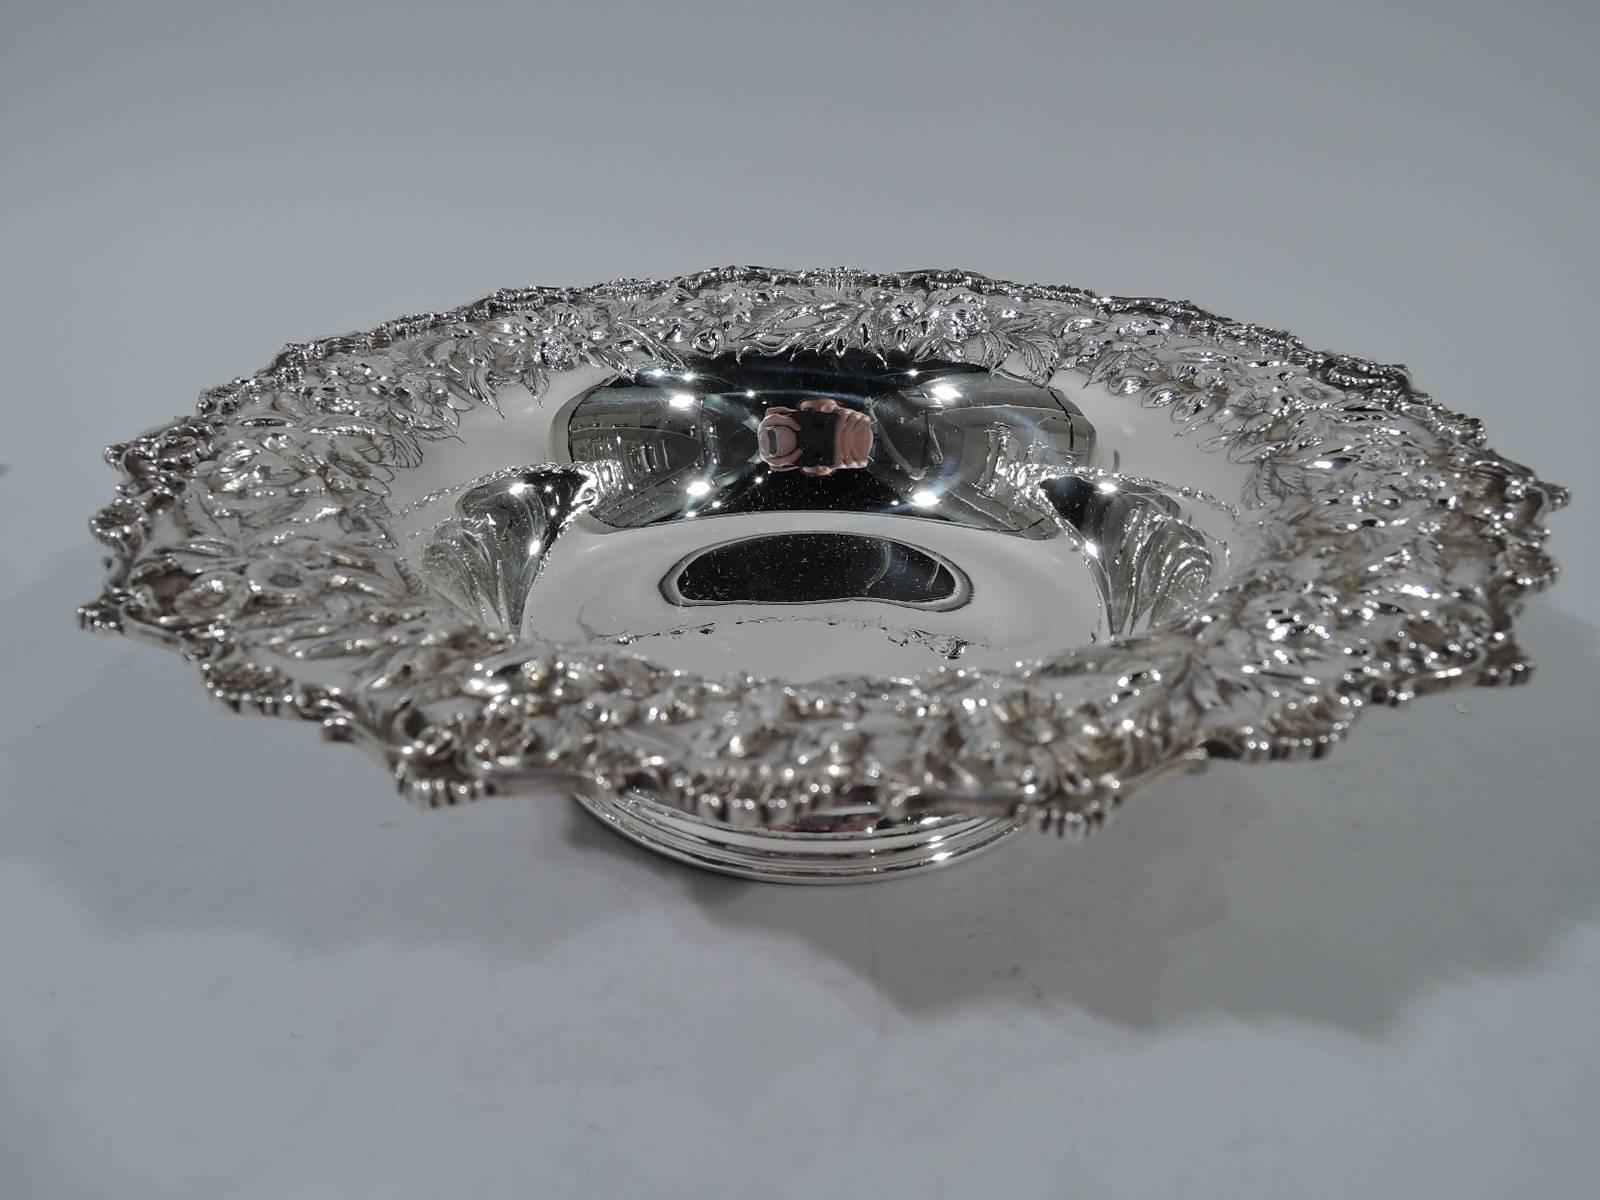 Sterling silver bowl. Made by S. Kirk & Son in Baltimore. Plain well and wide rim with repousse flowers and scrolled rim with applied c-scrolls, leaves and scallop shells. Spread foot. An attractive modernization of the traditional Baltimore look.